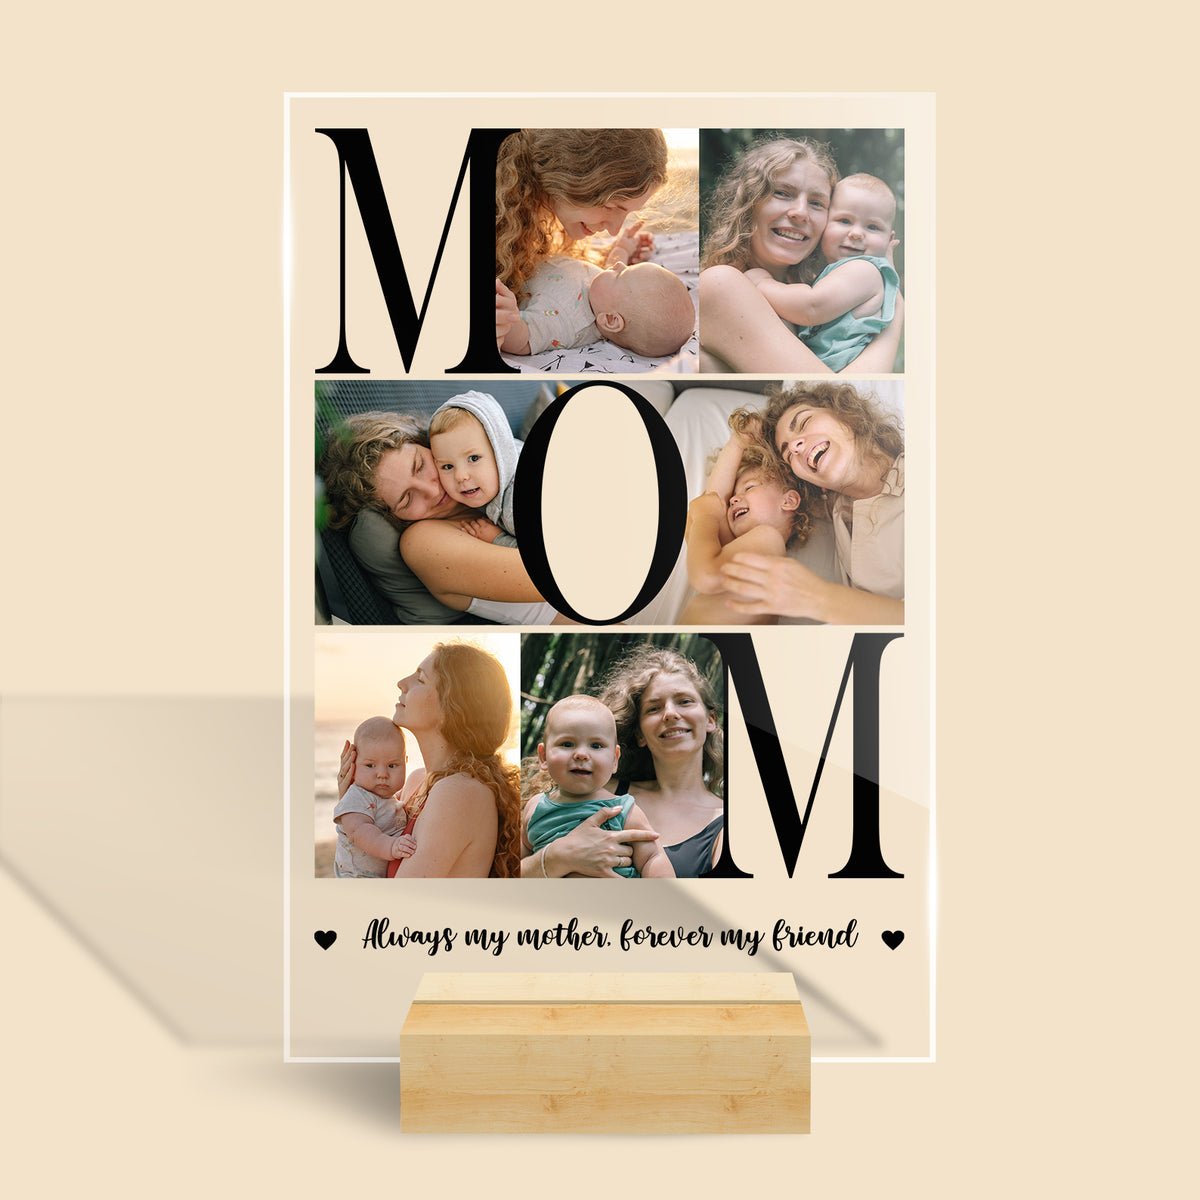 Personalised Wooden Photo Frame for Mother Birthday-Presto